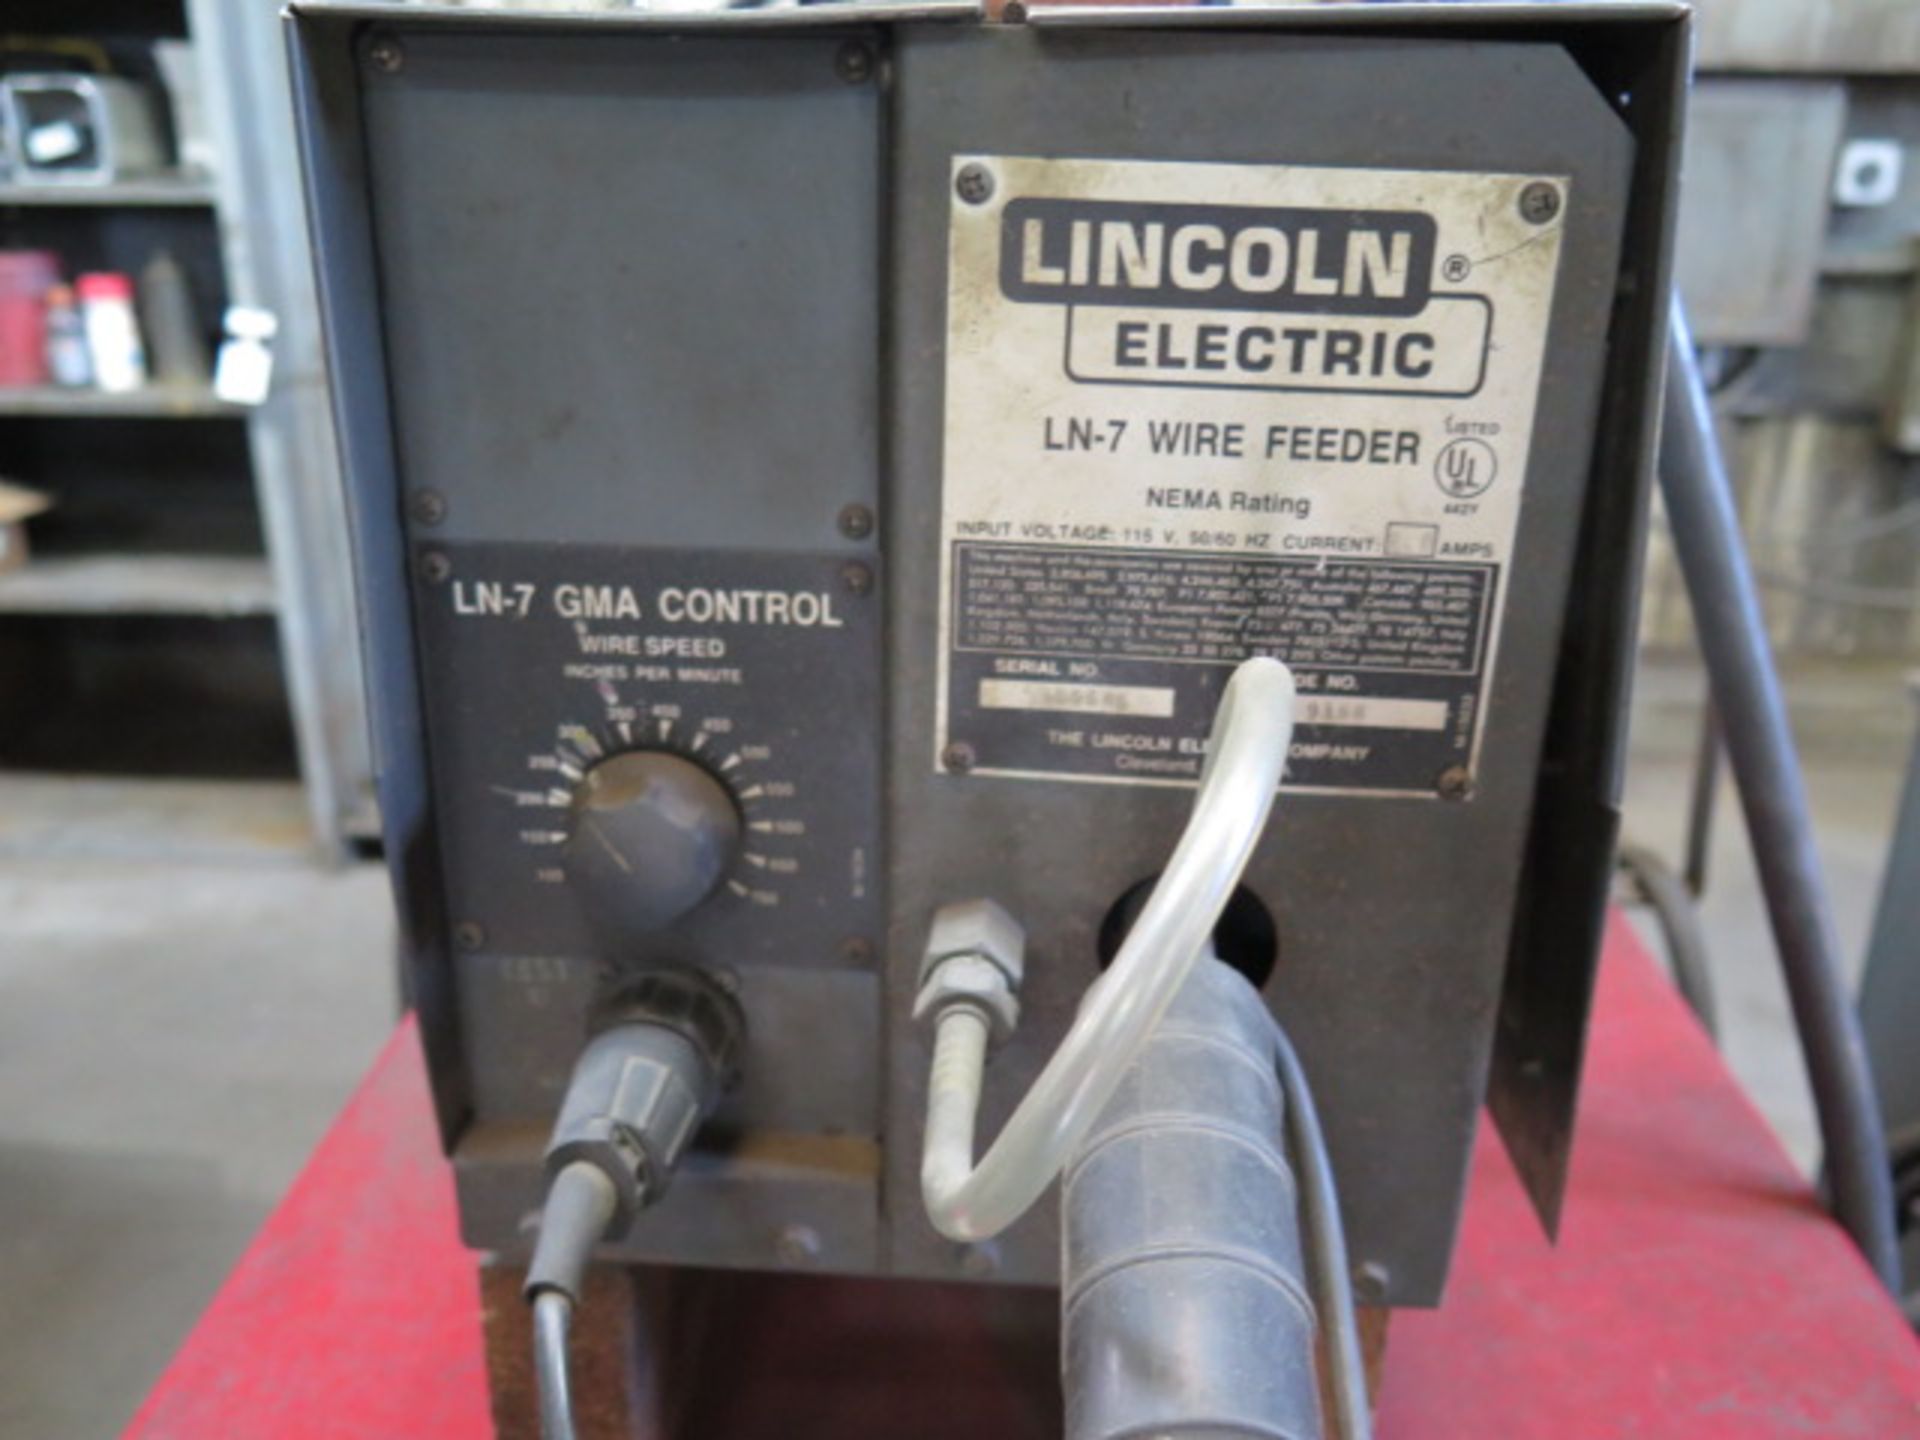 Lincoln Idealarc R3S-325 Arc Welding Power Source s/n AC-689271 (SOLD AS-IS - NO WARRANTY) - Image 6 of 8